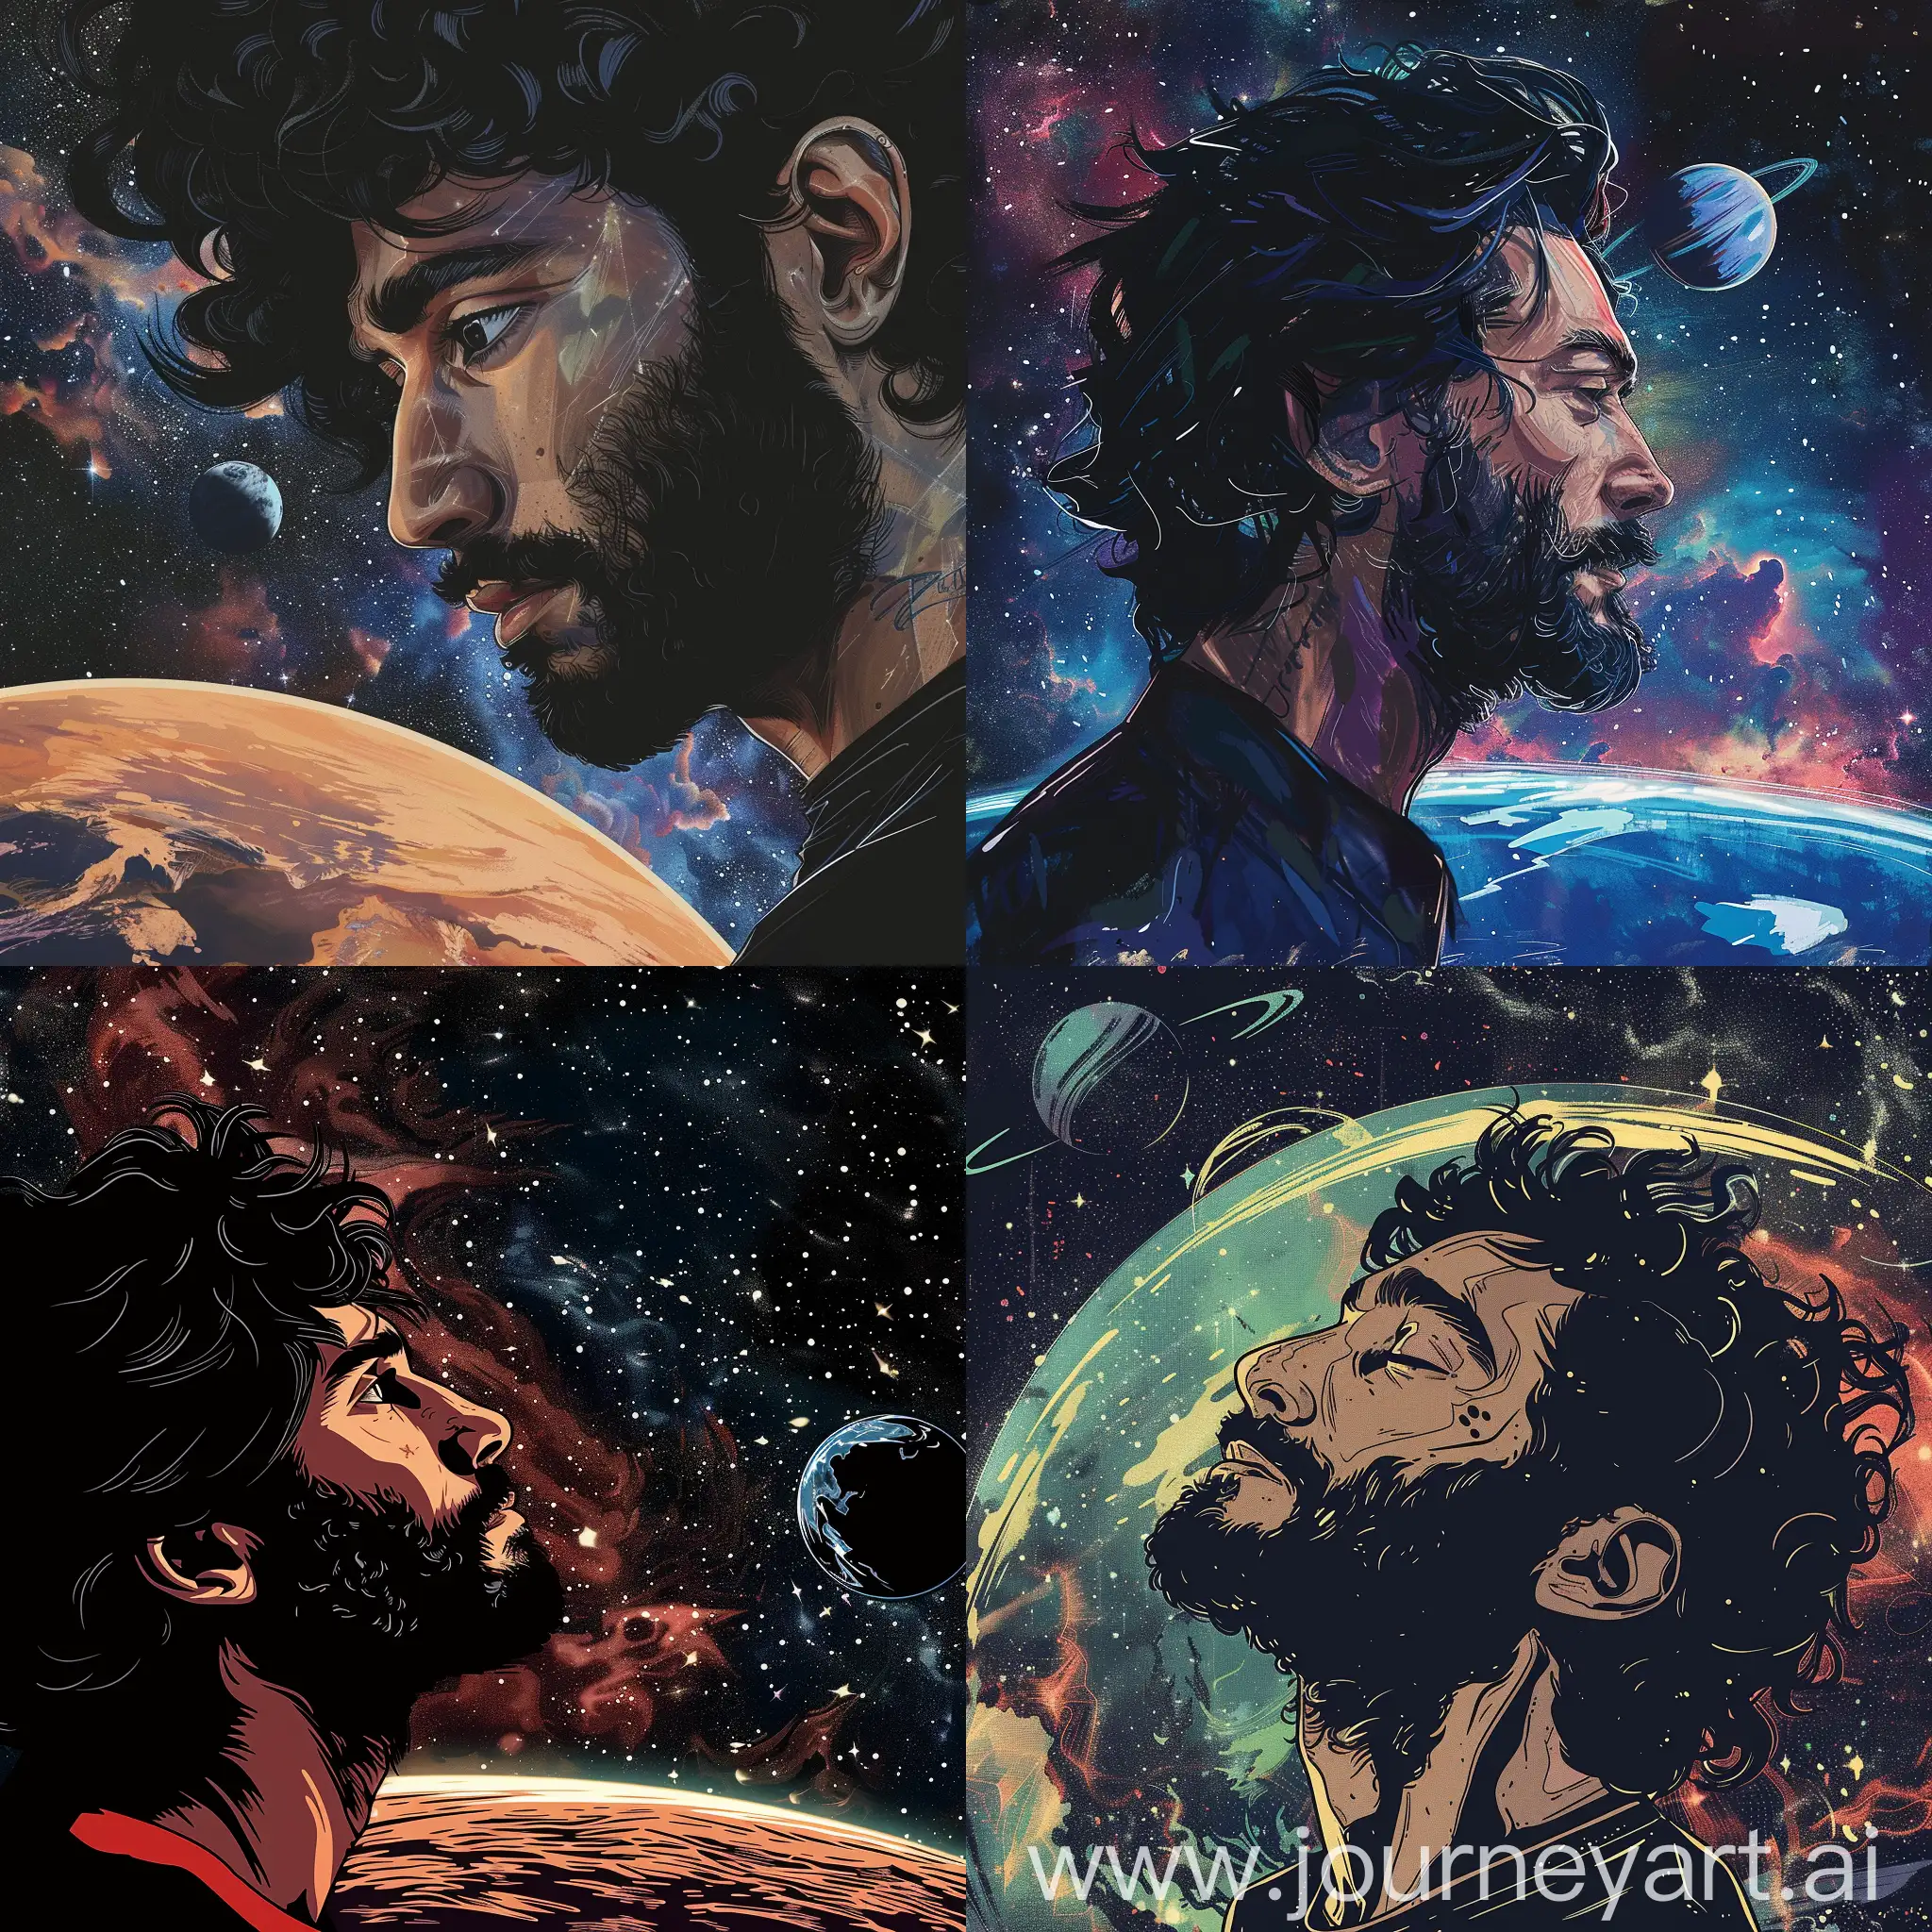 Illustration-of-a-Man-with-Black-Hair-and-Beard-Against-Cosmic-Background